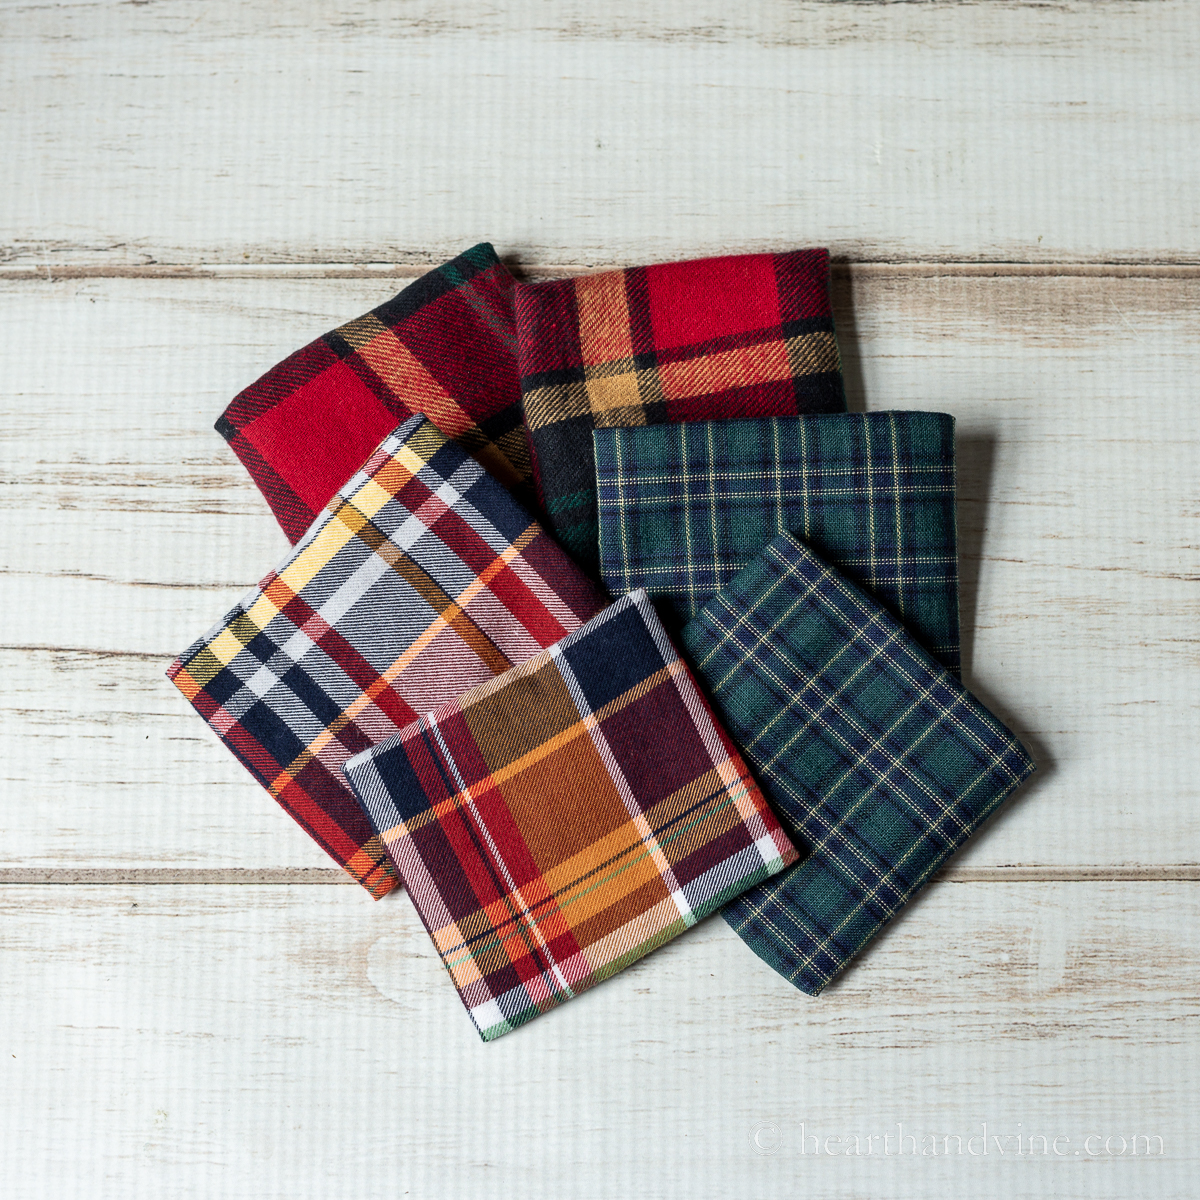 Three sets of hand warmers in plaid fabric.